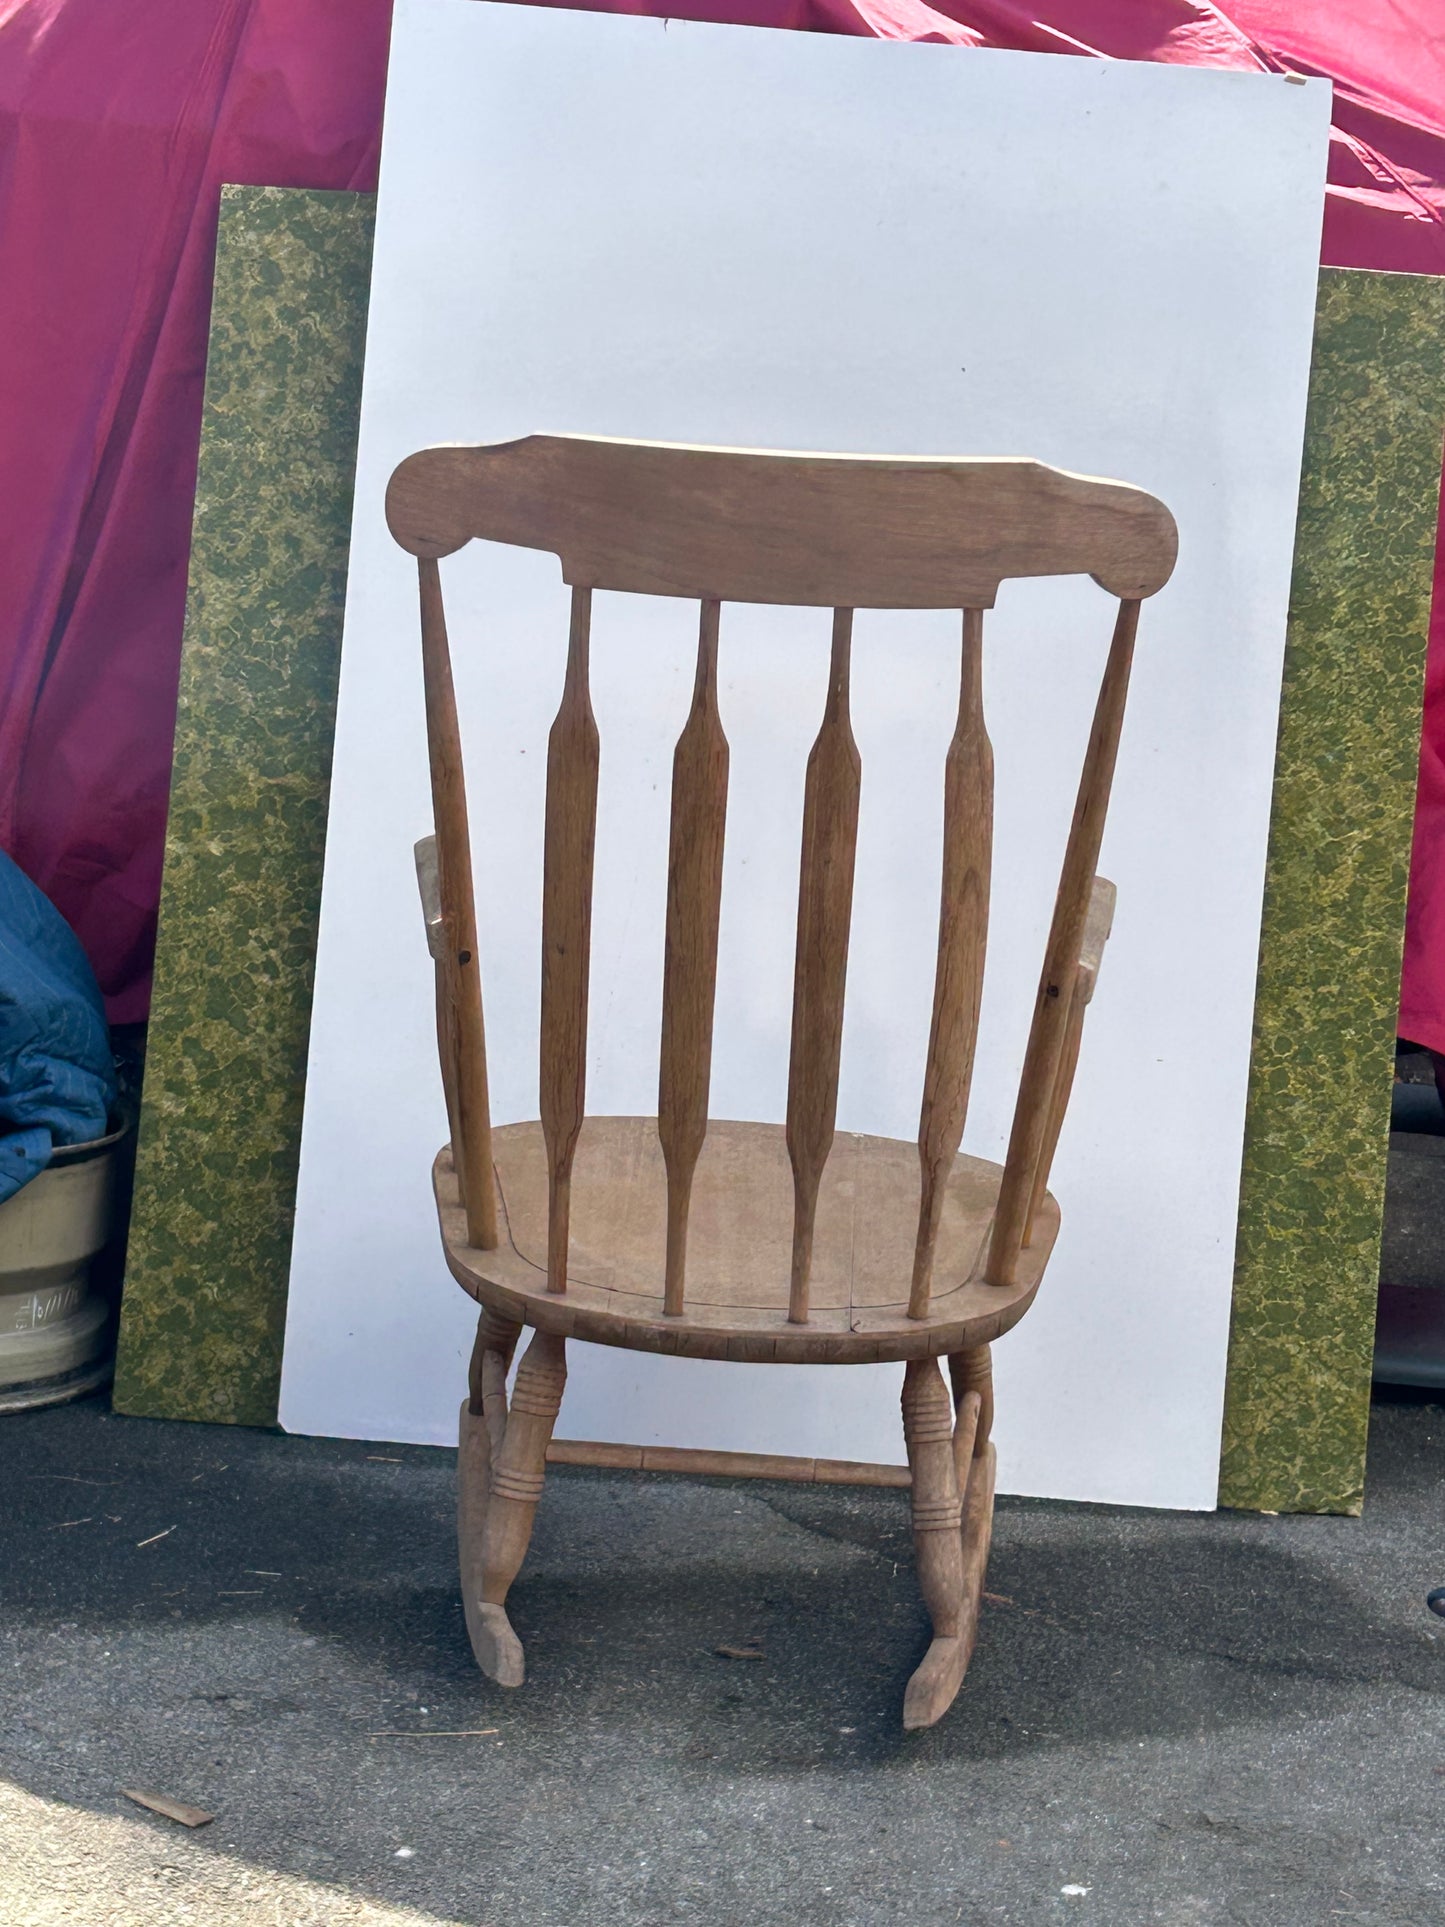 Vintage Wooden Rocking Chair featuring a Wide Seat